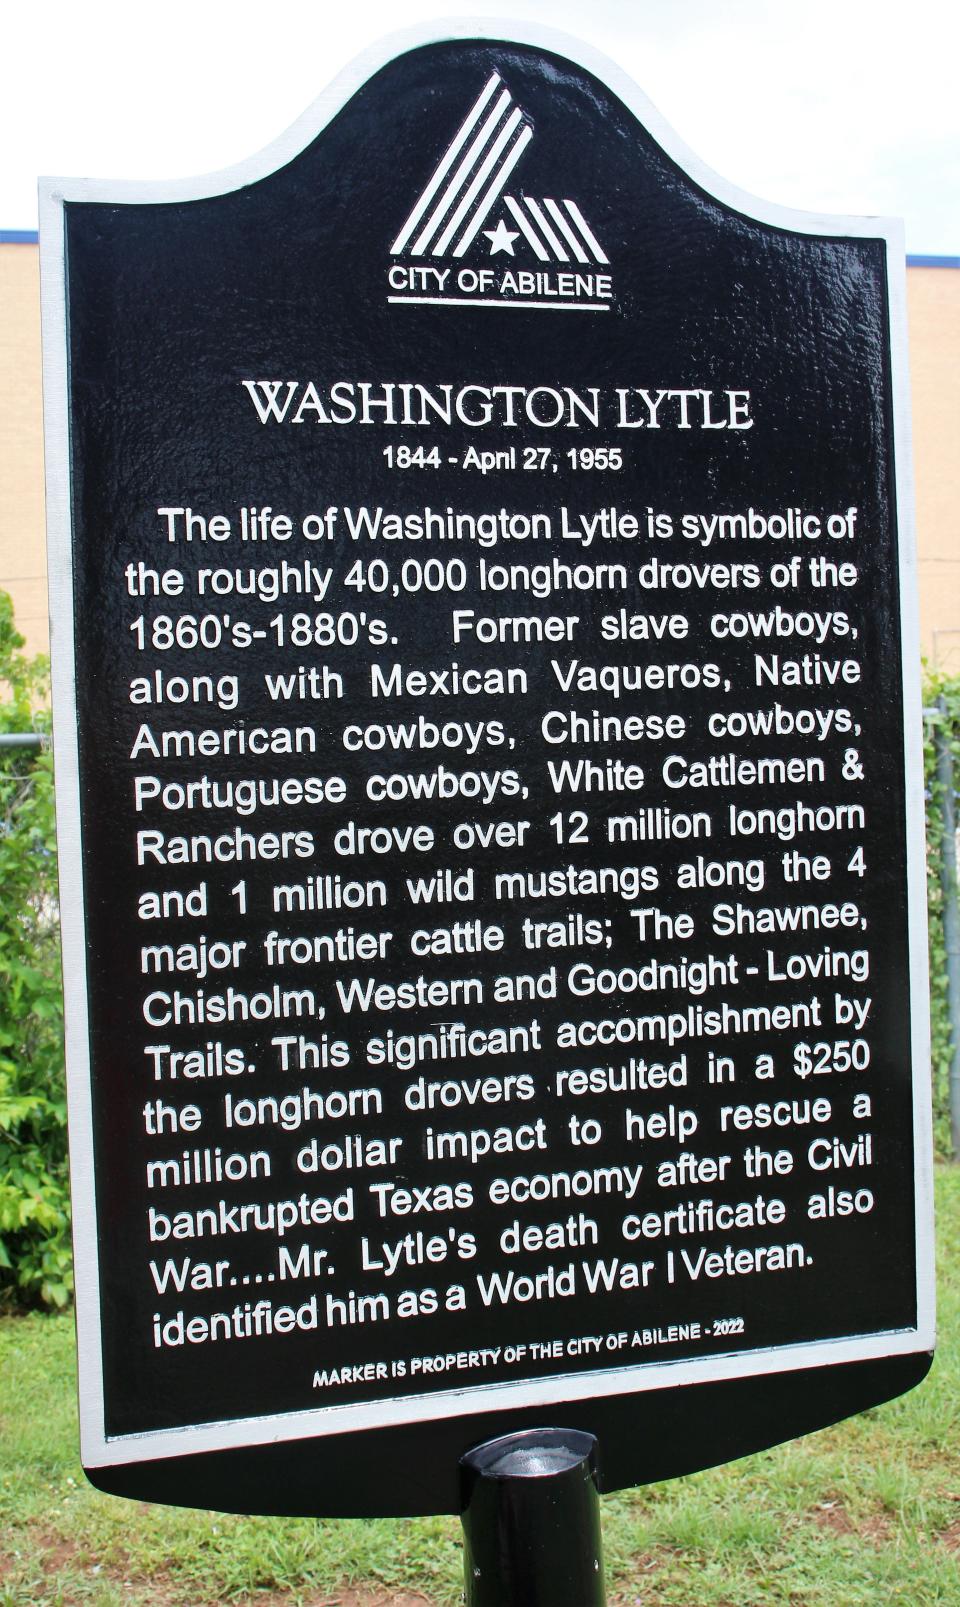 A city of Abilene historical marker has been placed at the grave of Wash Lytle, who is buried at Abilene Municipal Cemetery.